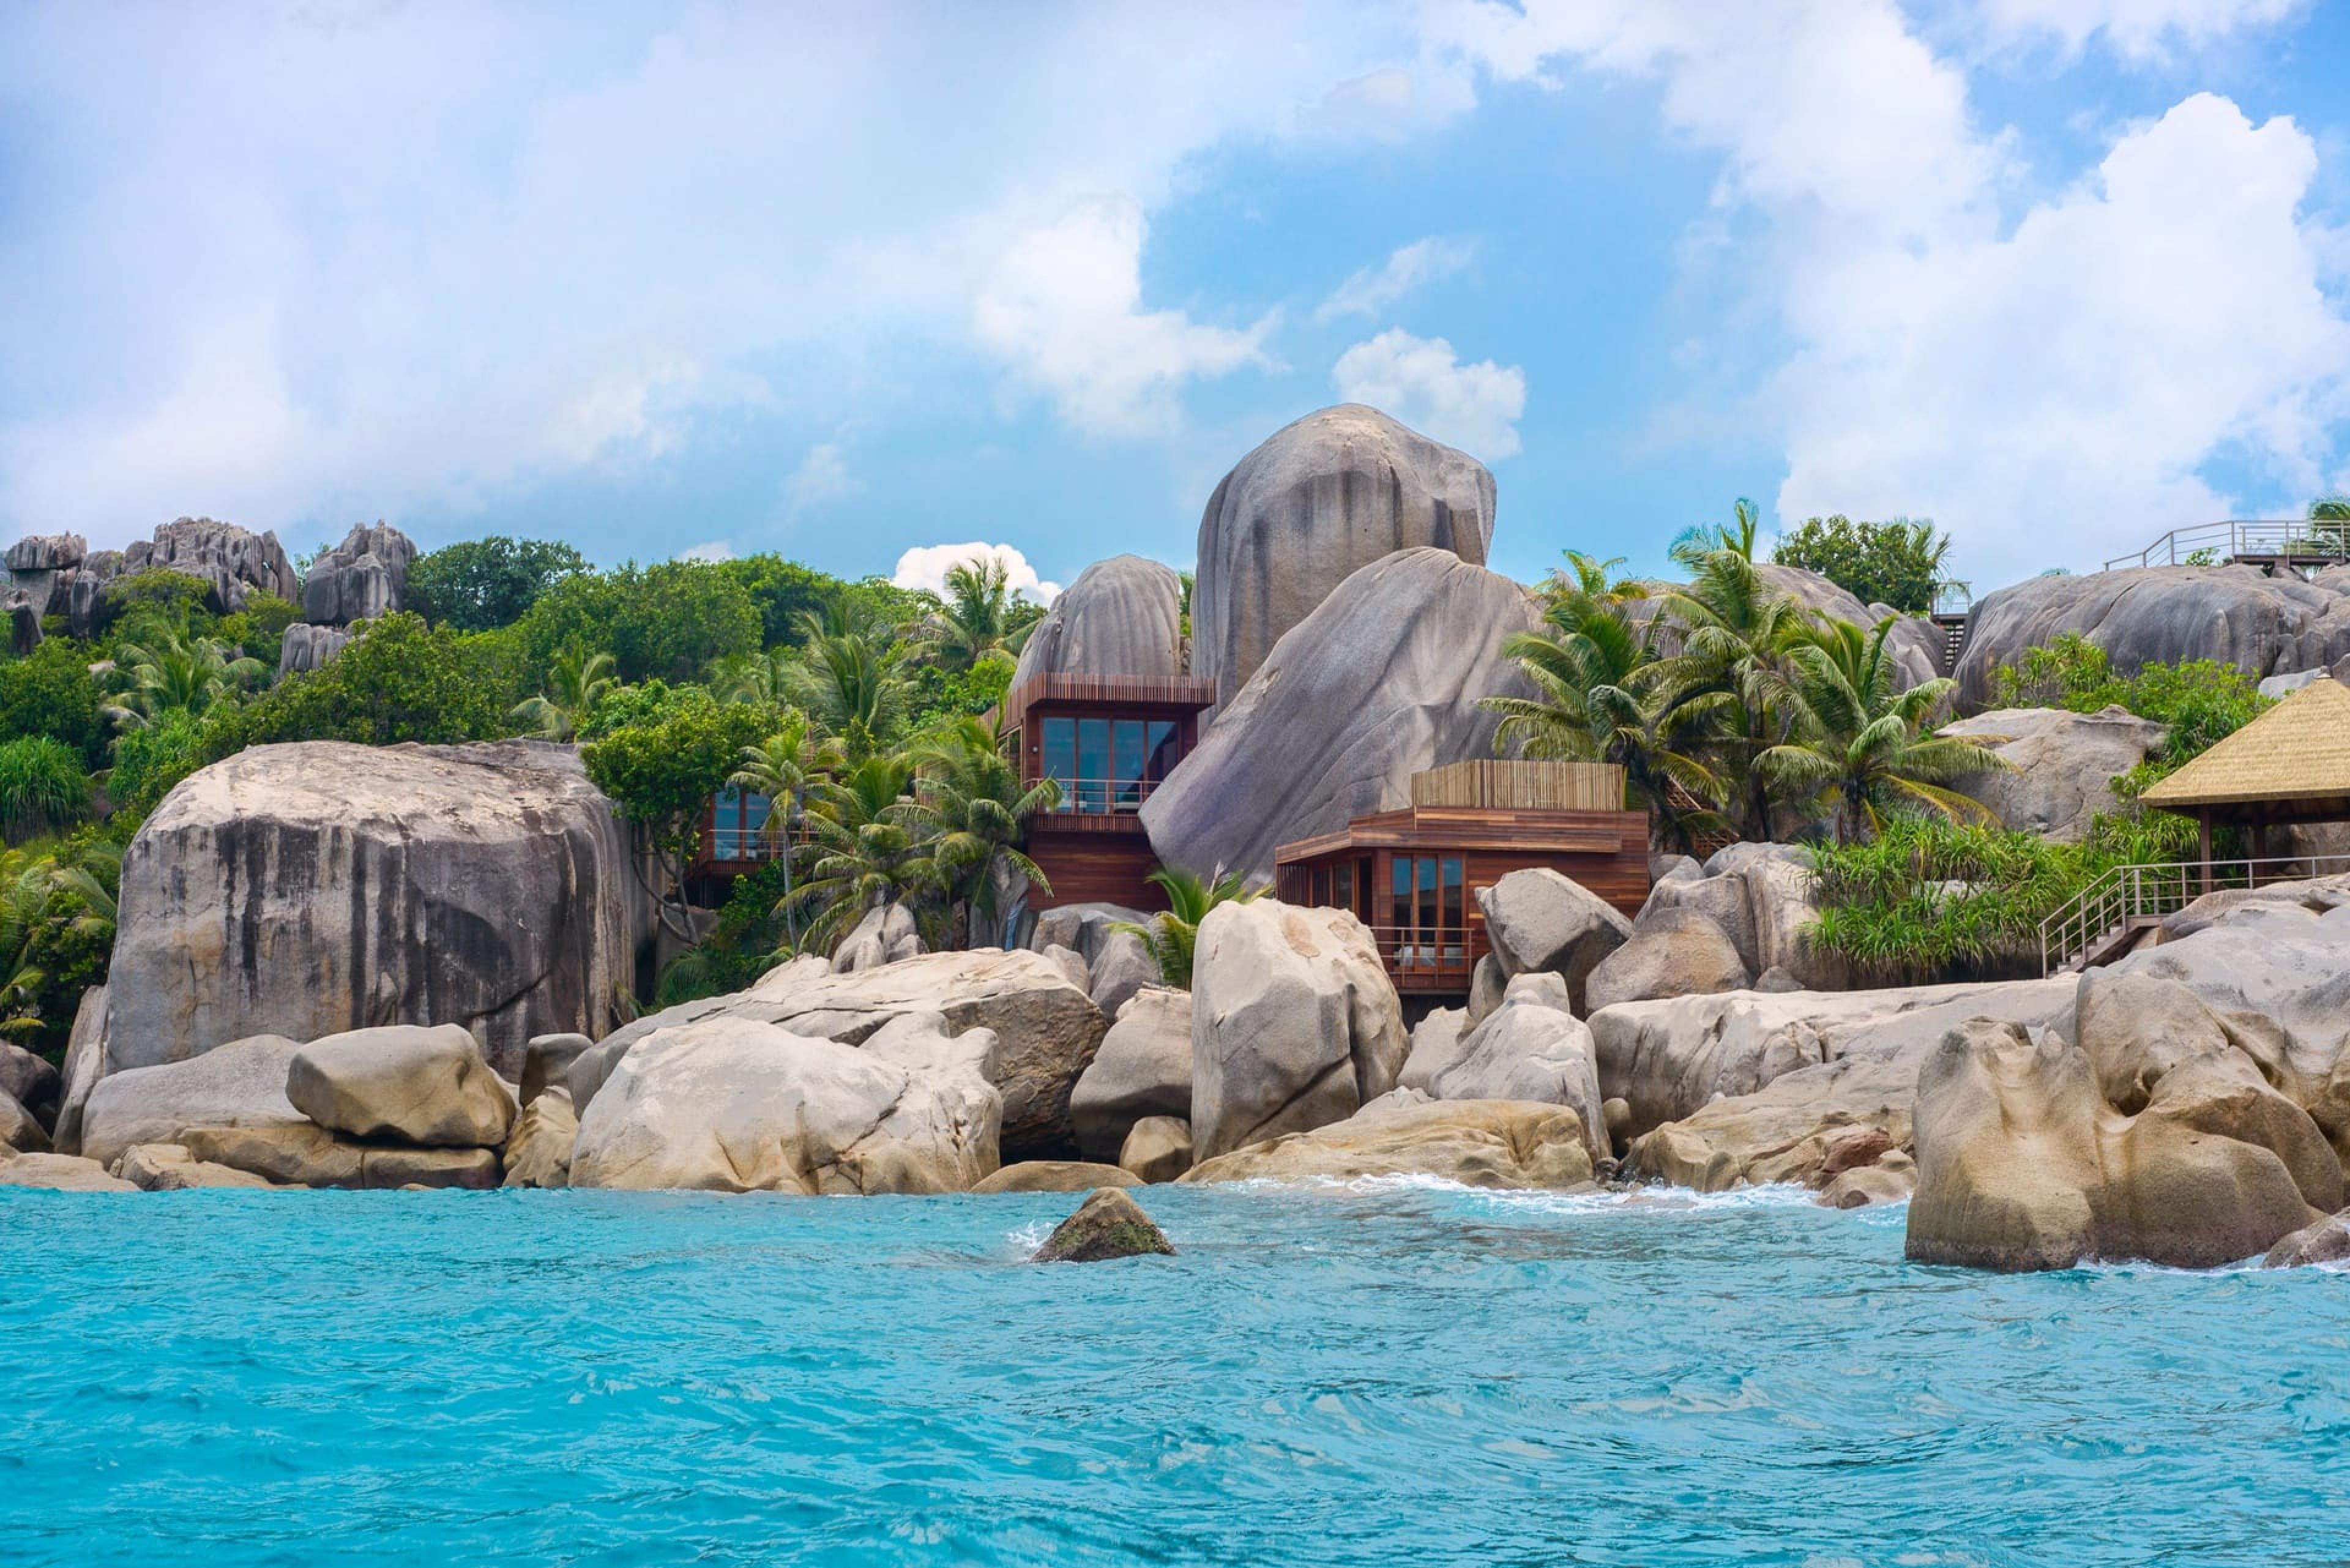 view from water looking towards big boulders on tropical island